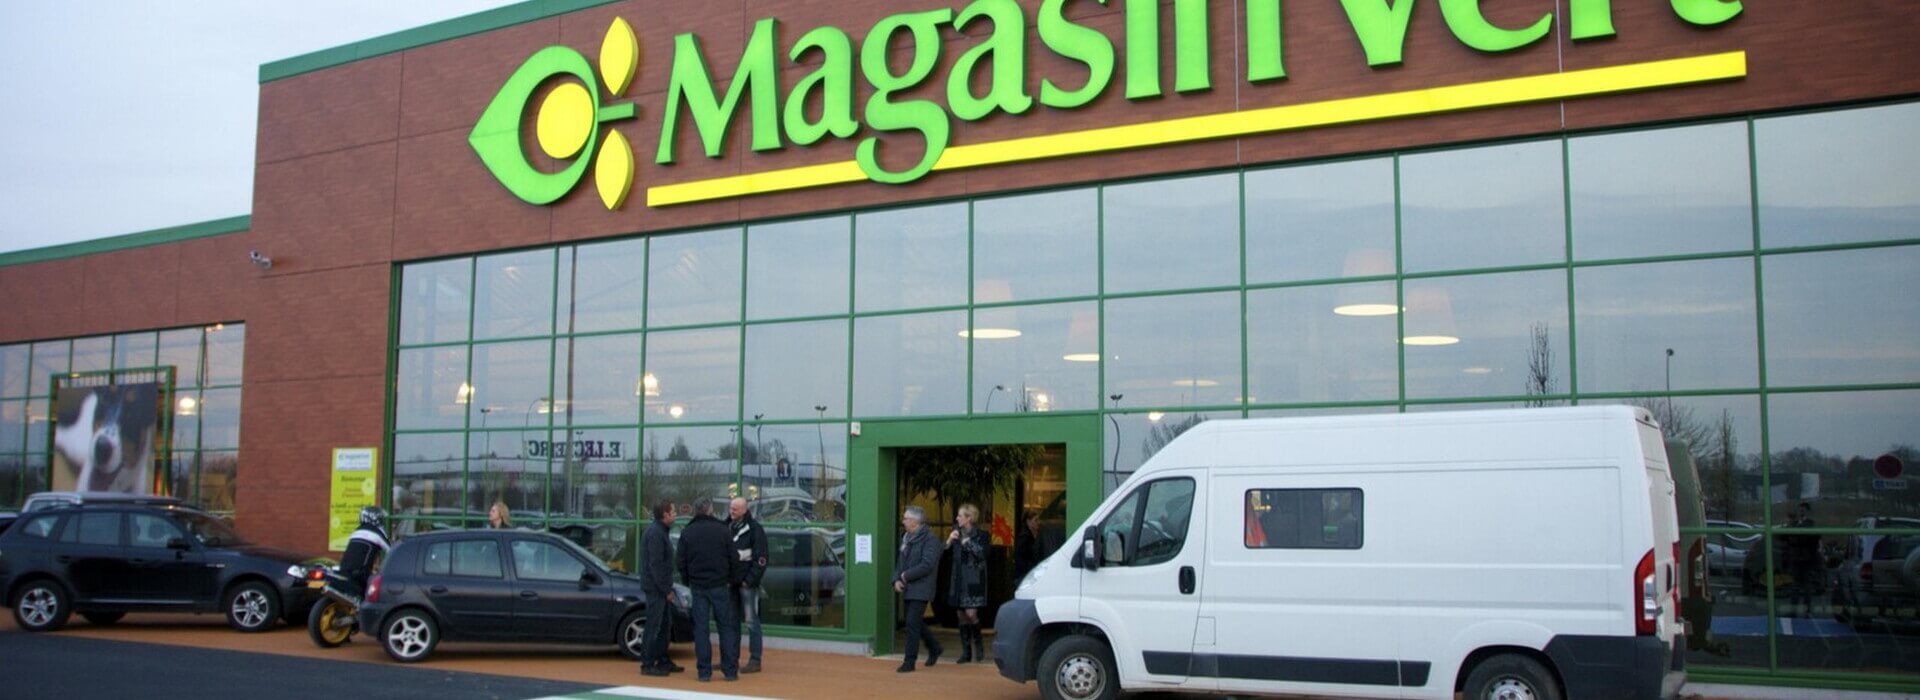 New build Magasin Vert, Marly (France) 2013